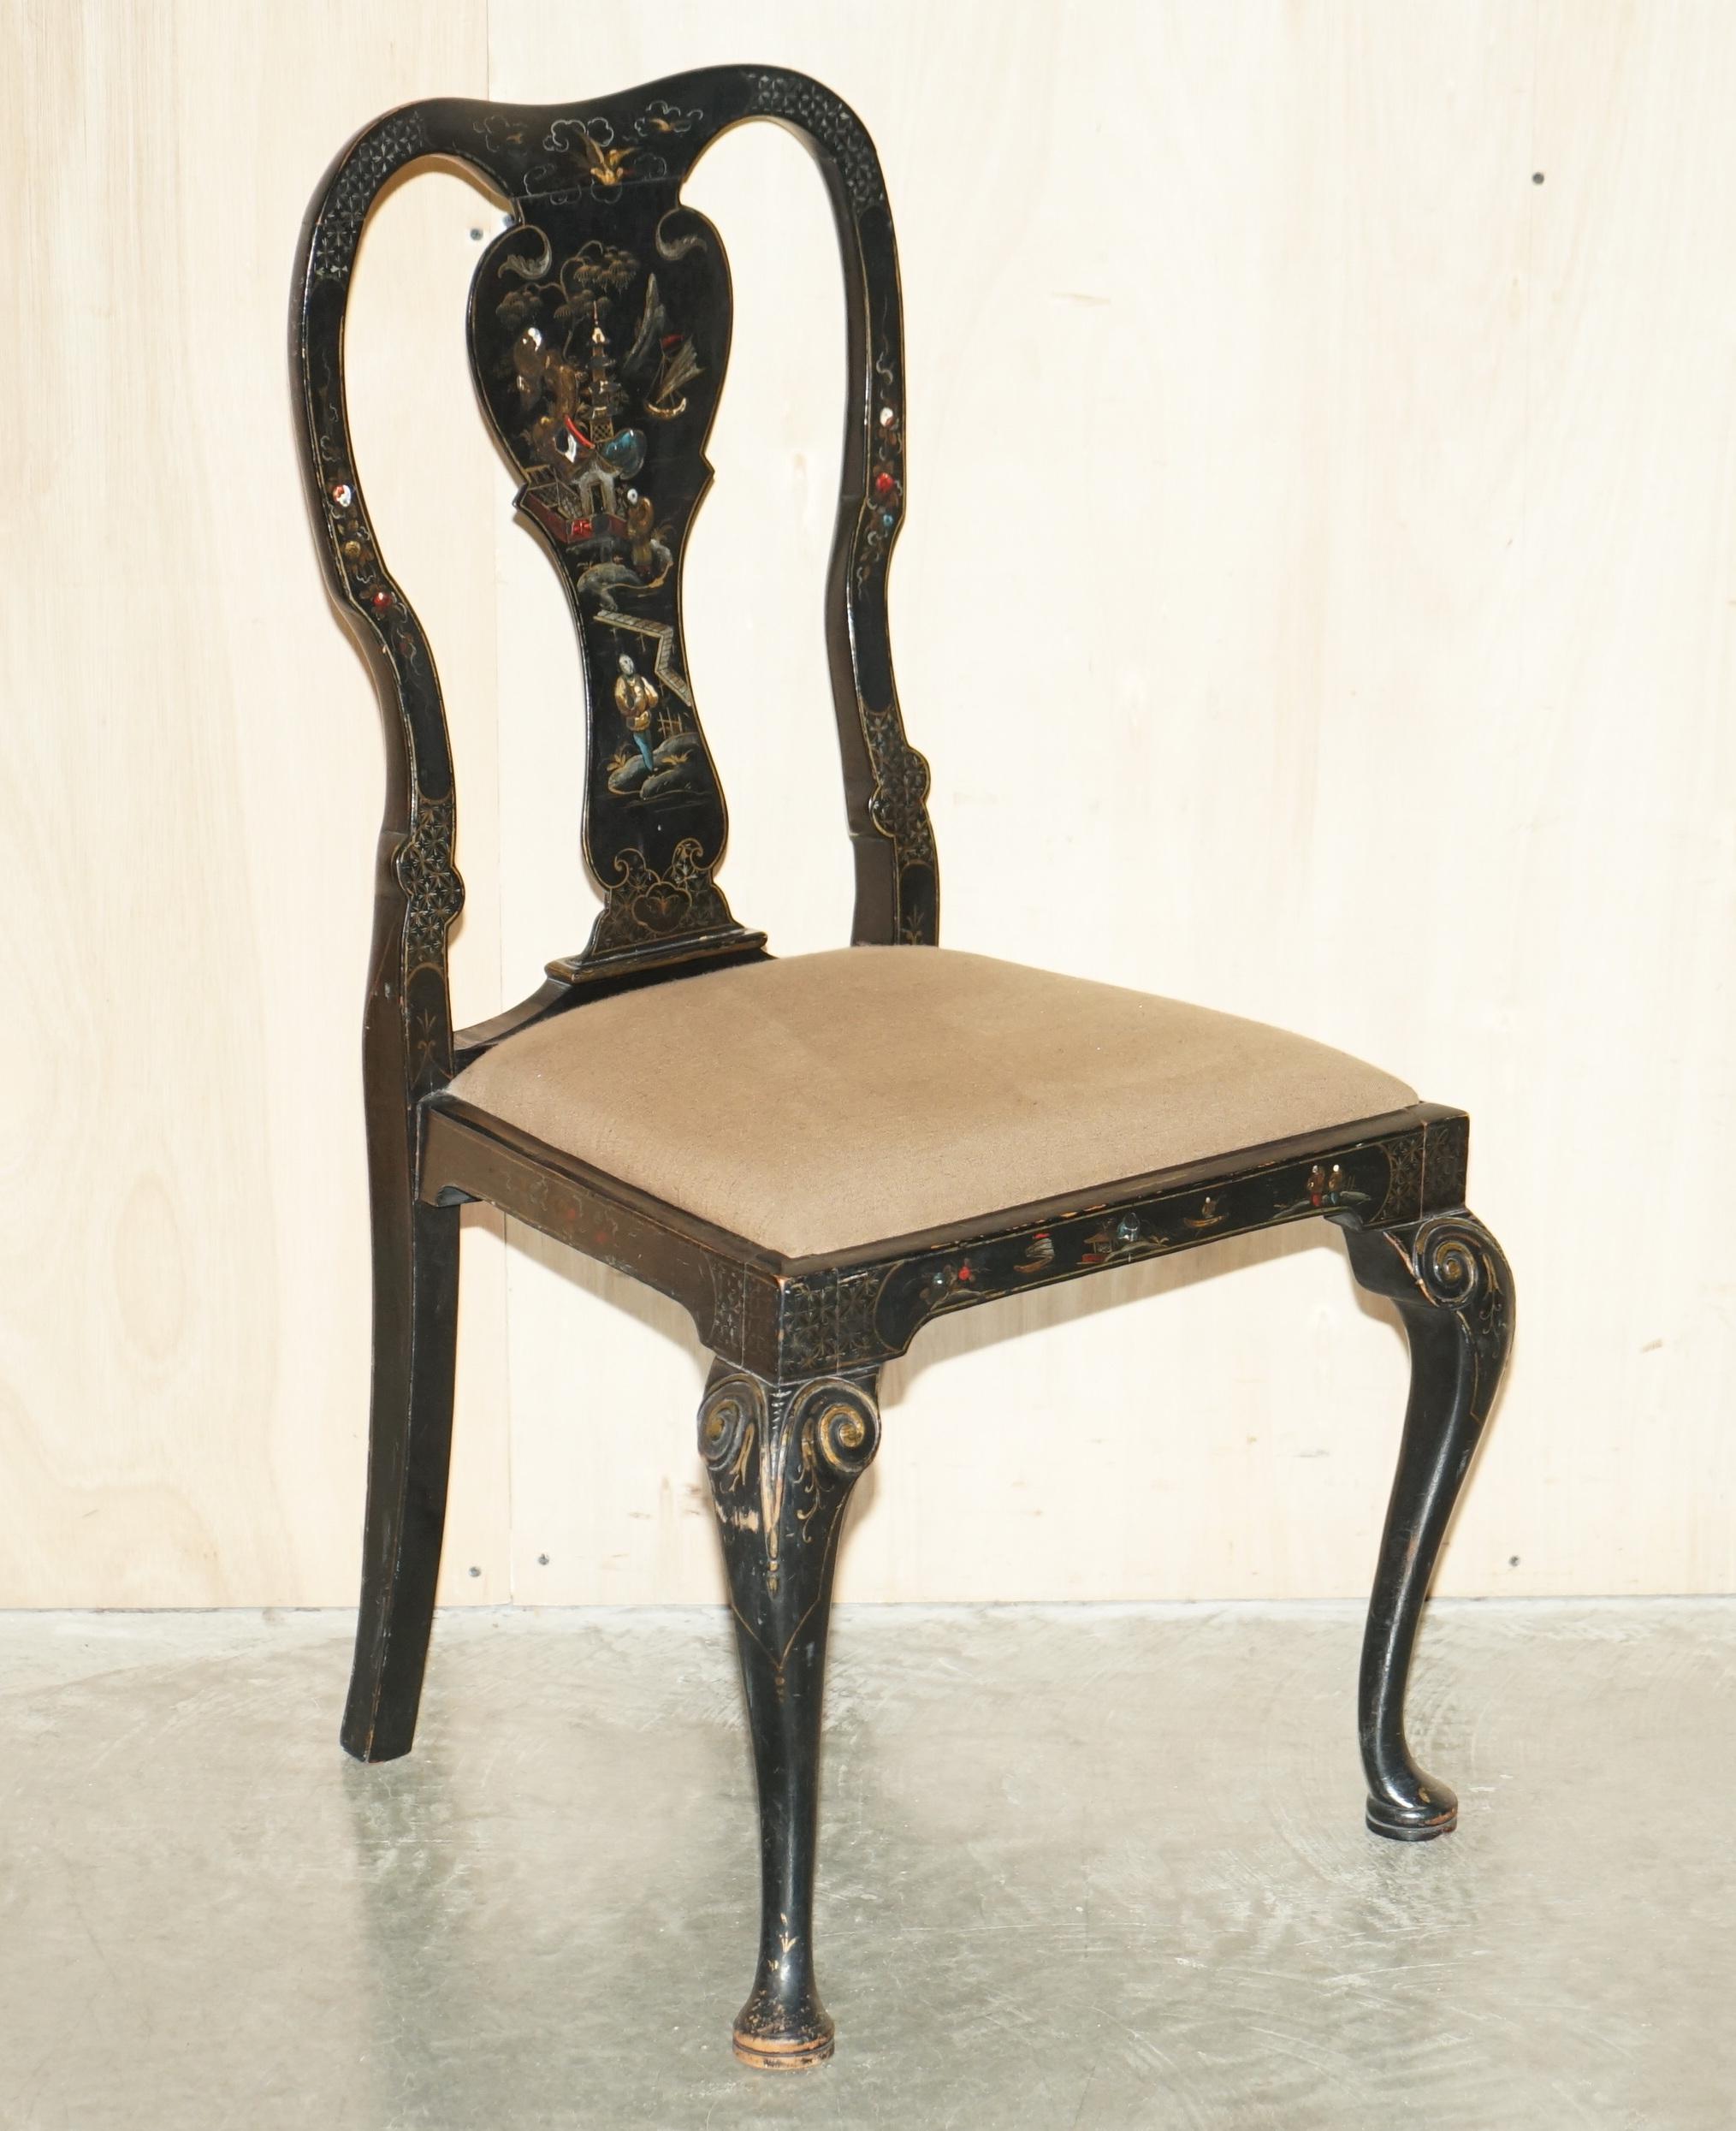 We are delighted to offer for sale this stunning pair of Antique Victorian highly decorative Chinese Chinoiserie black lacquered side chairs in the George III style

They are a sublime set, very finely made in period timber, they are basically art